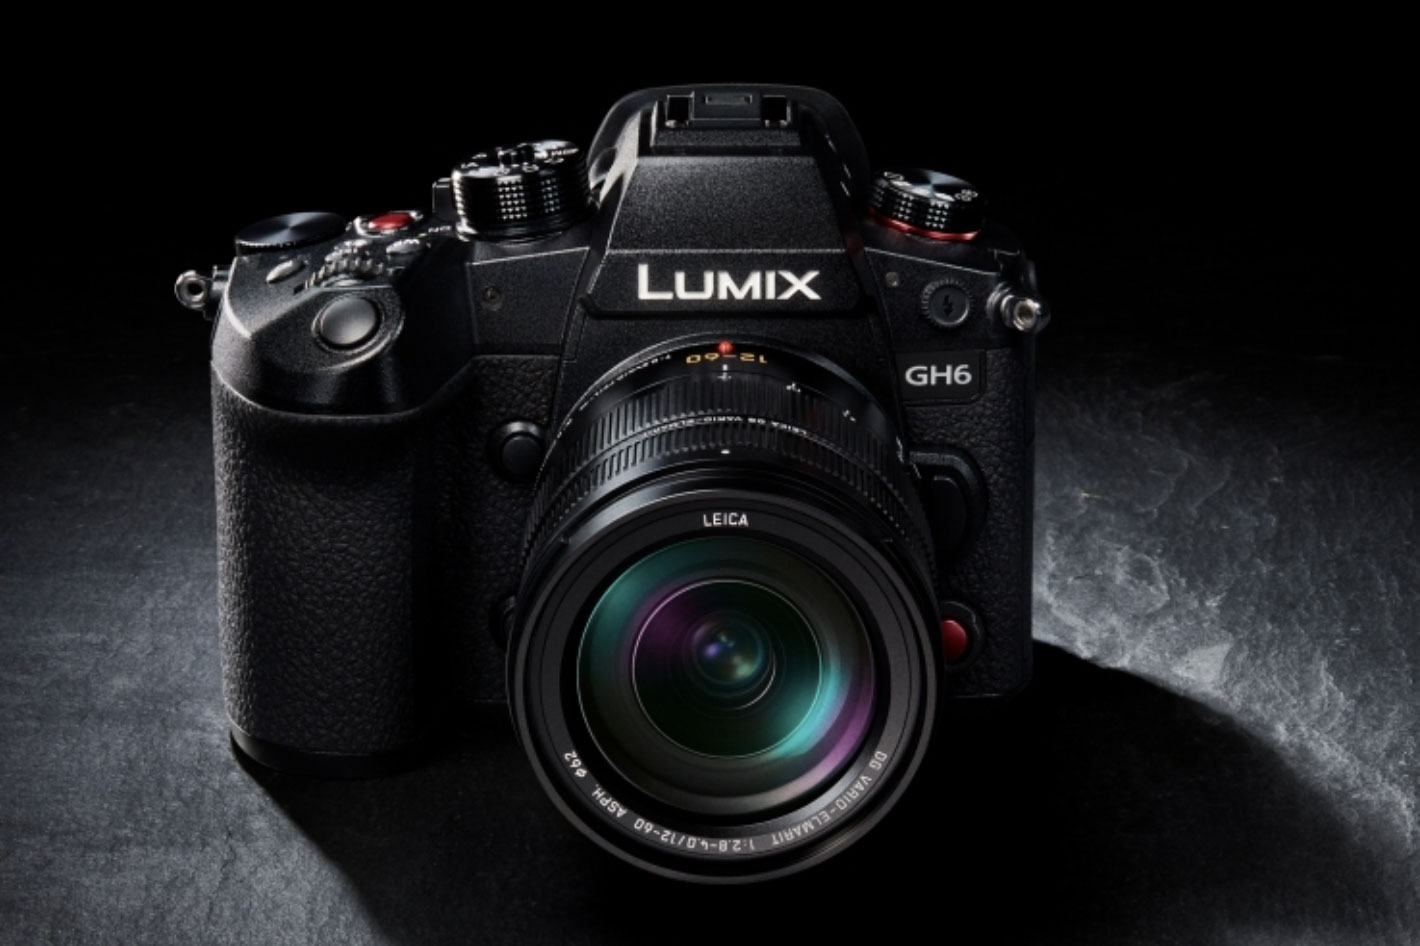 LUMIX GH6: the tech behind the new camera